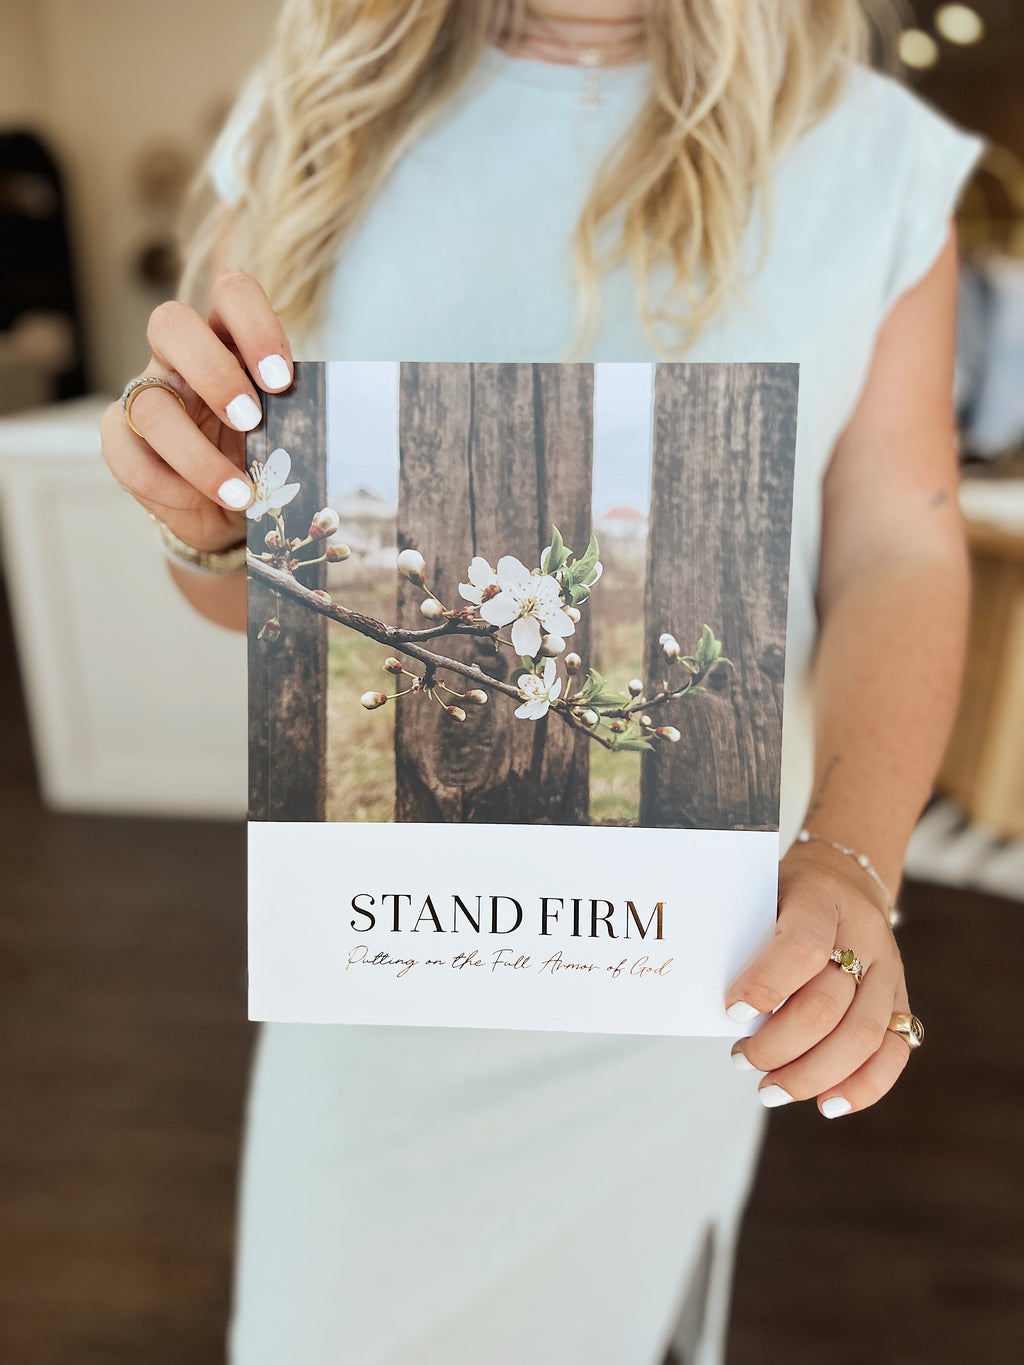 Stand Firm - Putting on The Full Armor of God